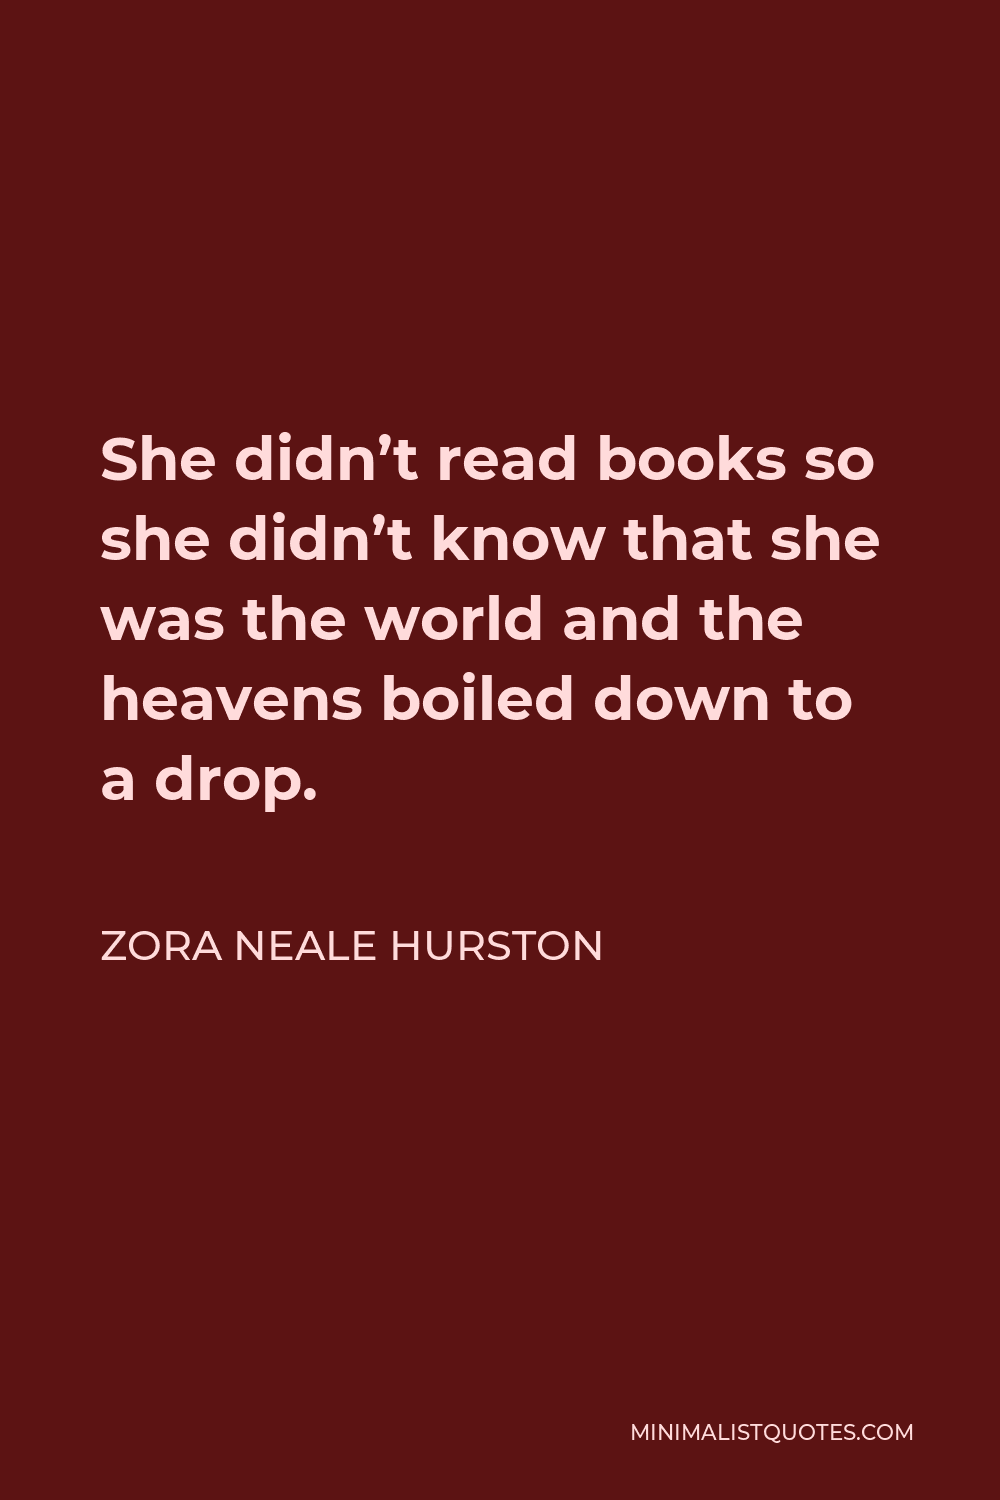 Zora Neale Hurston Quote - She didn’t read books so she didn’t know that she was the world and the heavens boiled down to a drop.